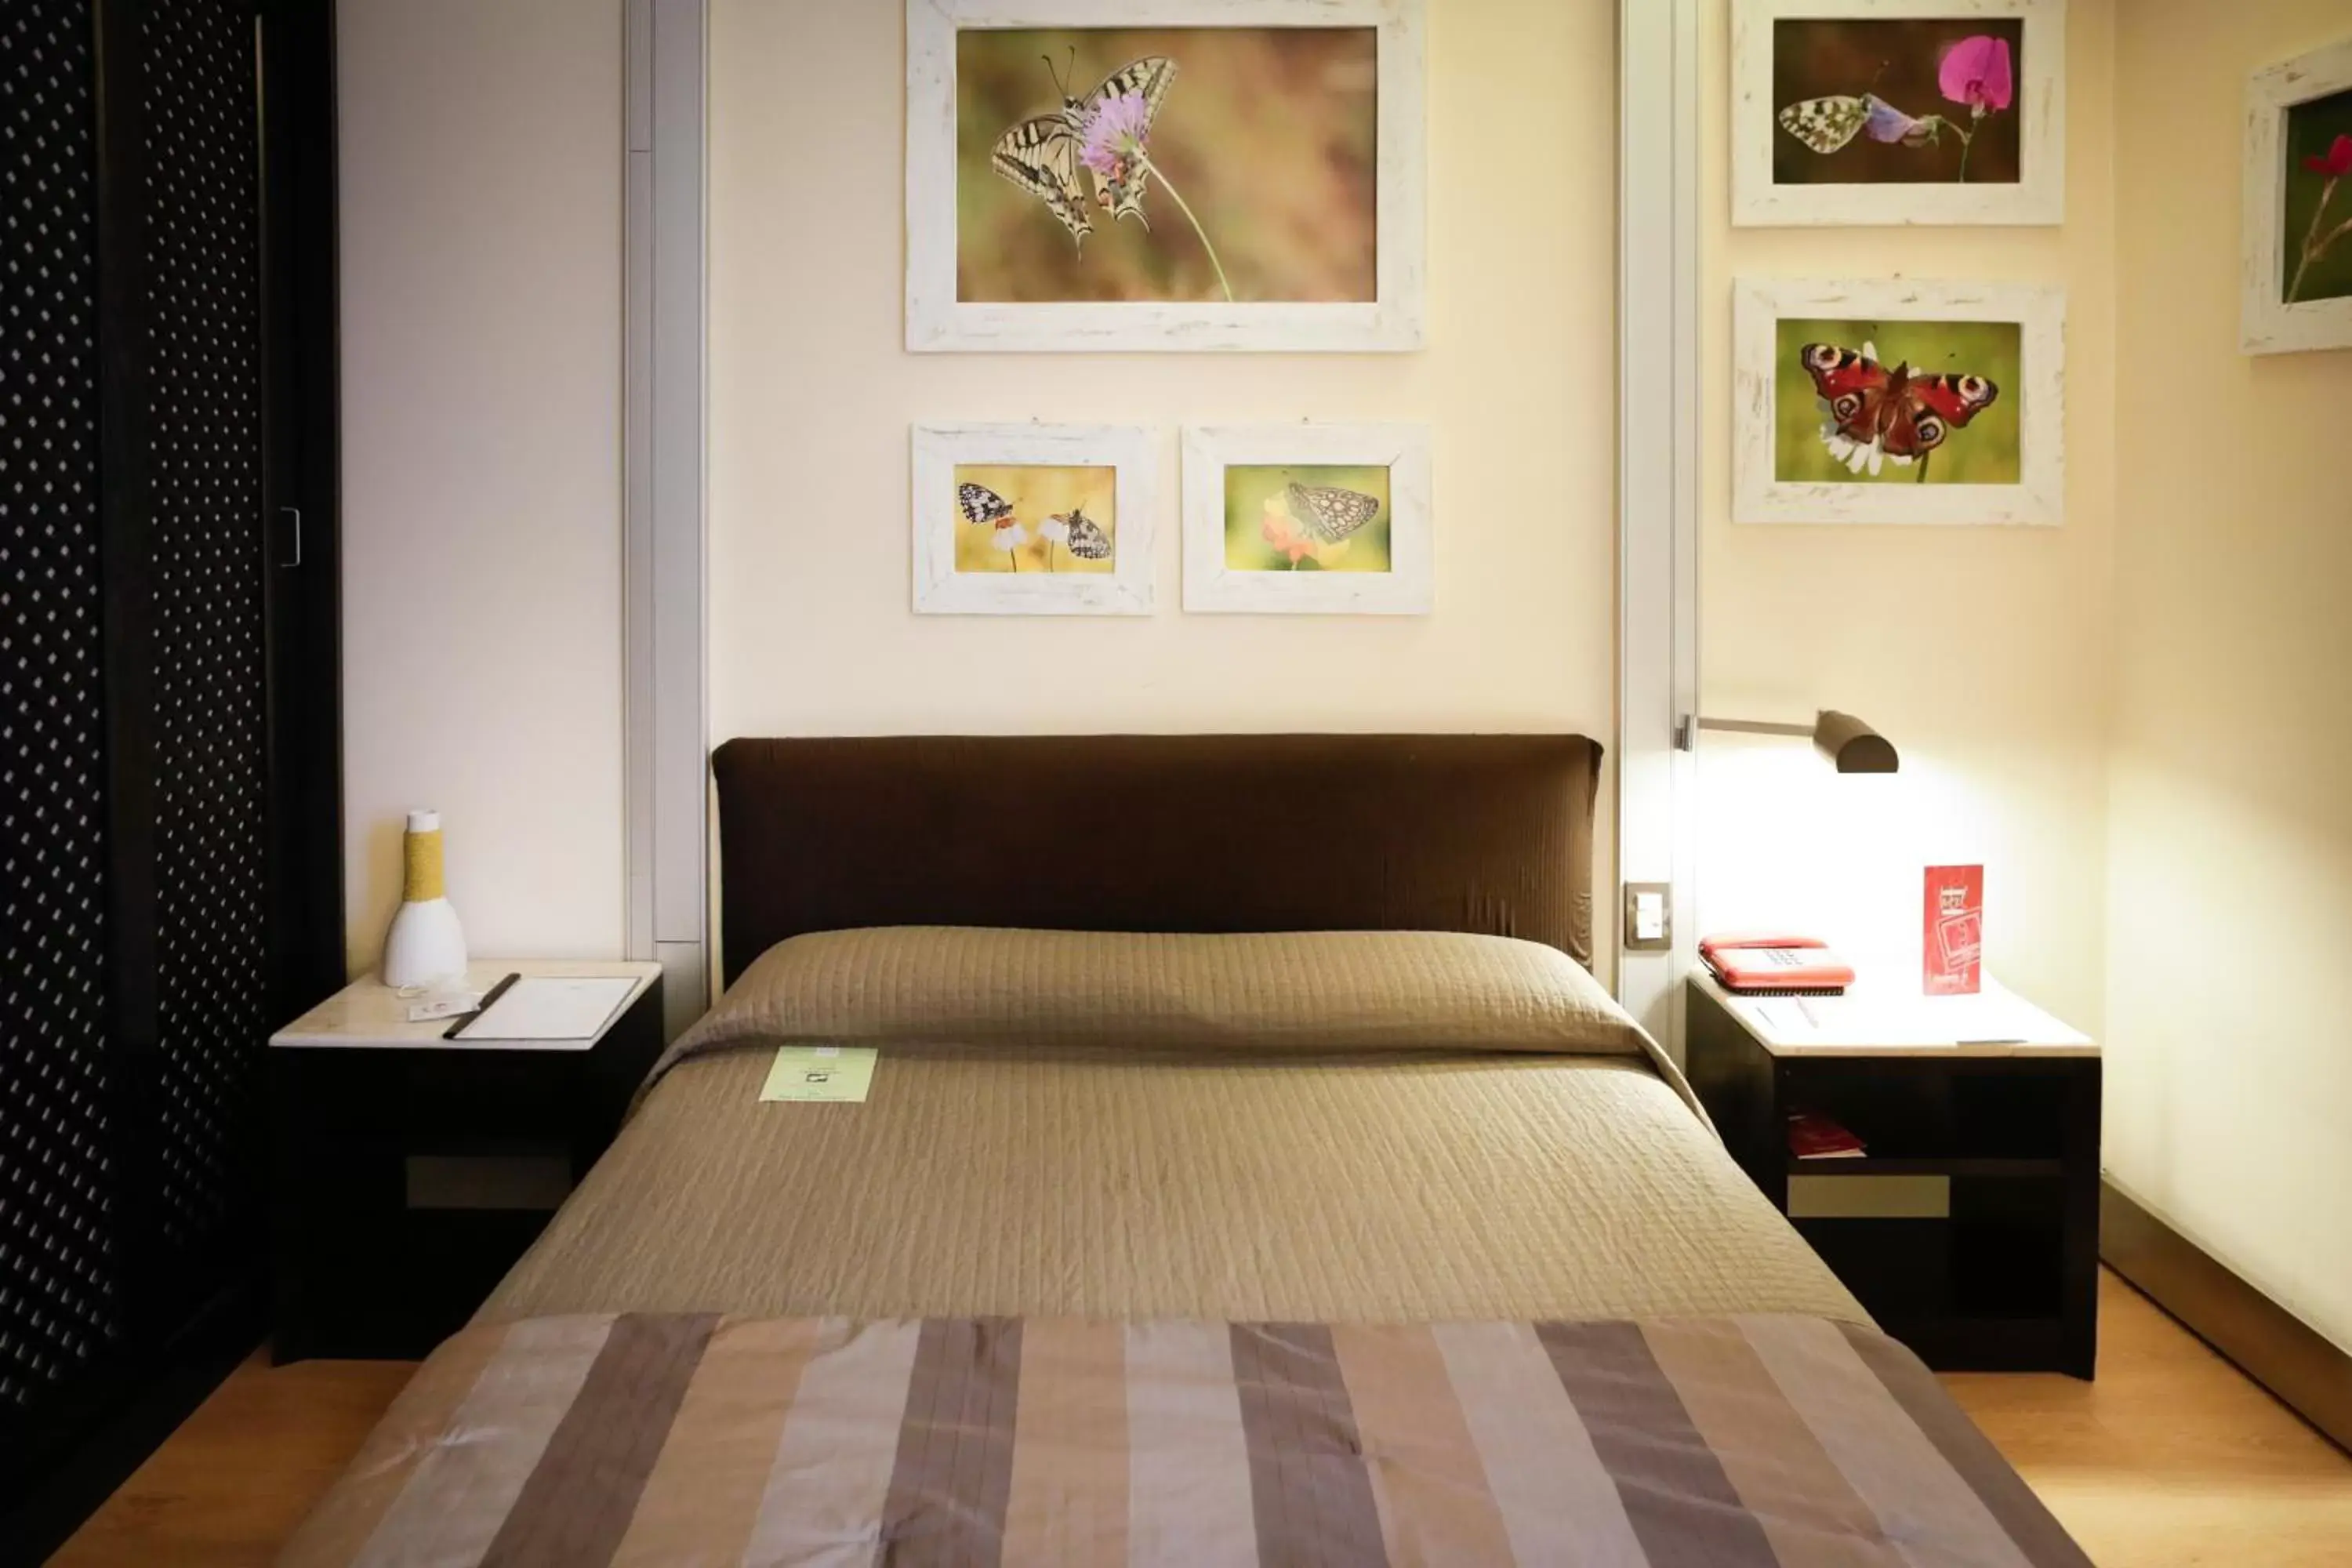 Bed, Room Photo in Art Hotel Museo